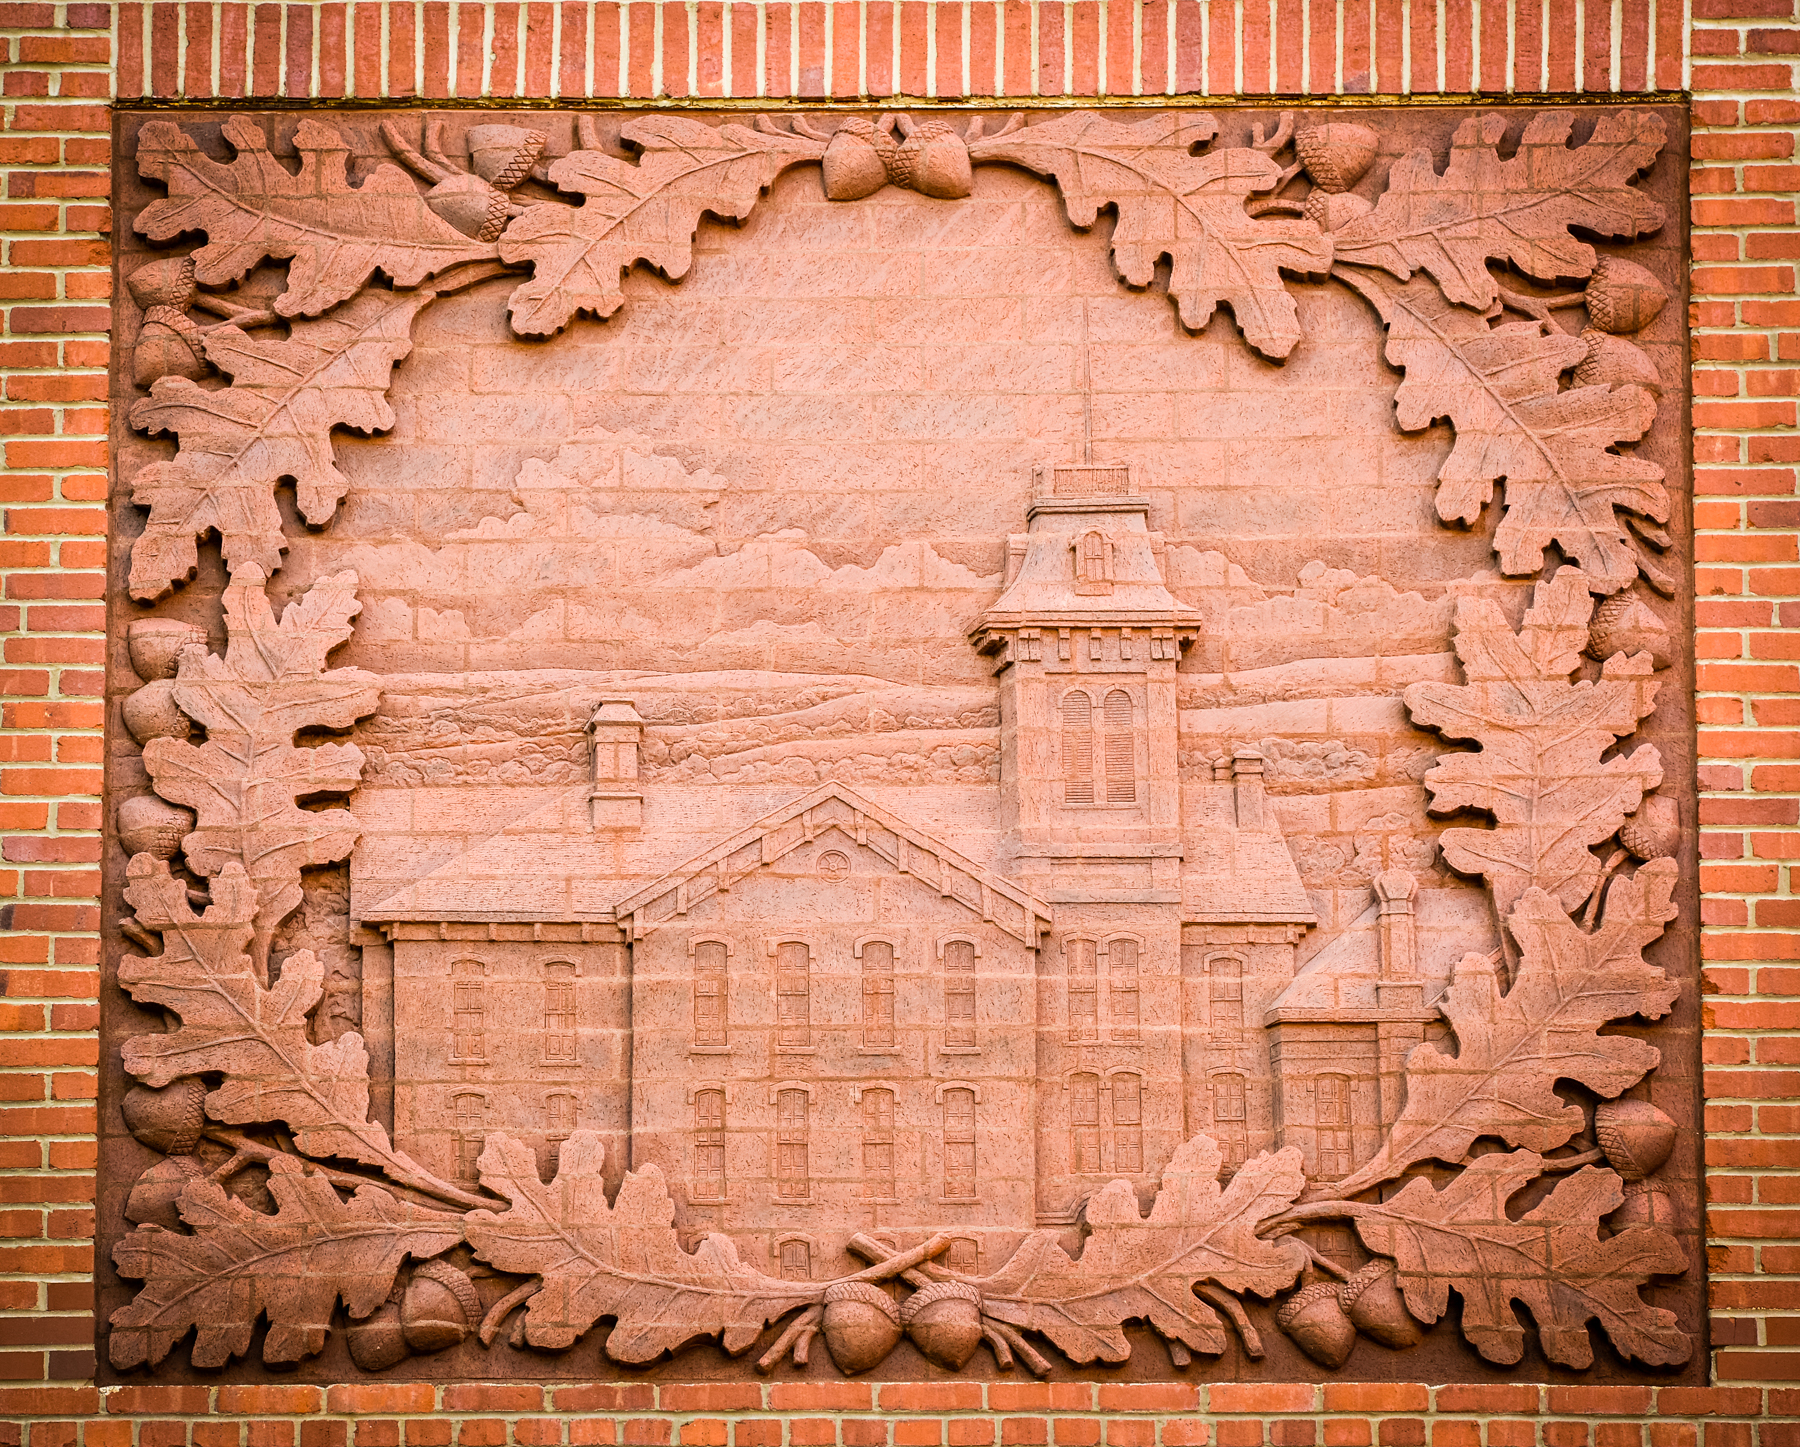 Close up view of the brick relief on the theatre wall showing Normal Hall, most often referred to as Old Main, the original building in the space occupied by Hoyt Hall and the College Theatre.